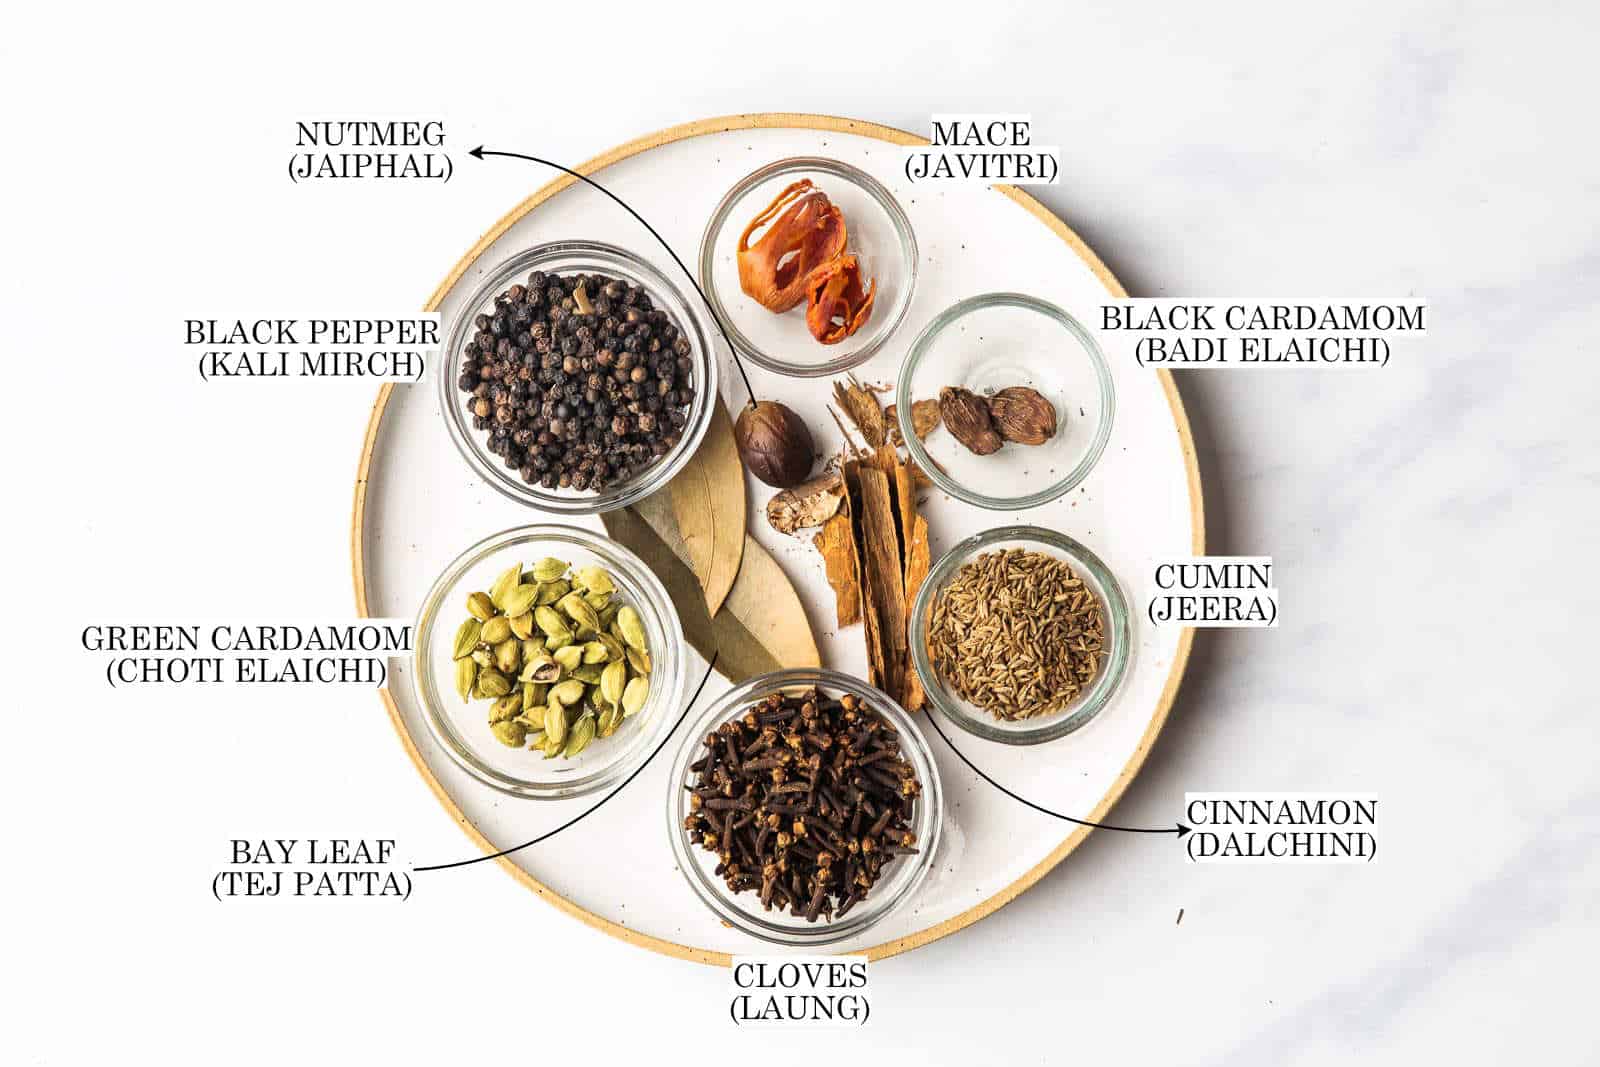 A picture showing all the ingredients that go into garam masala along with the names of the spices used in hindi as well as english